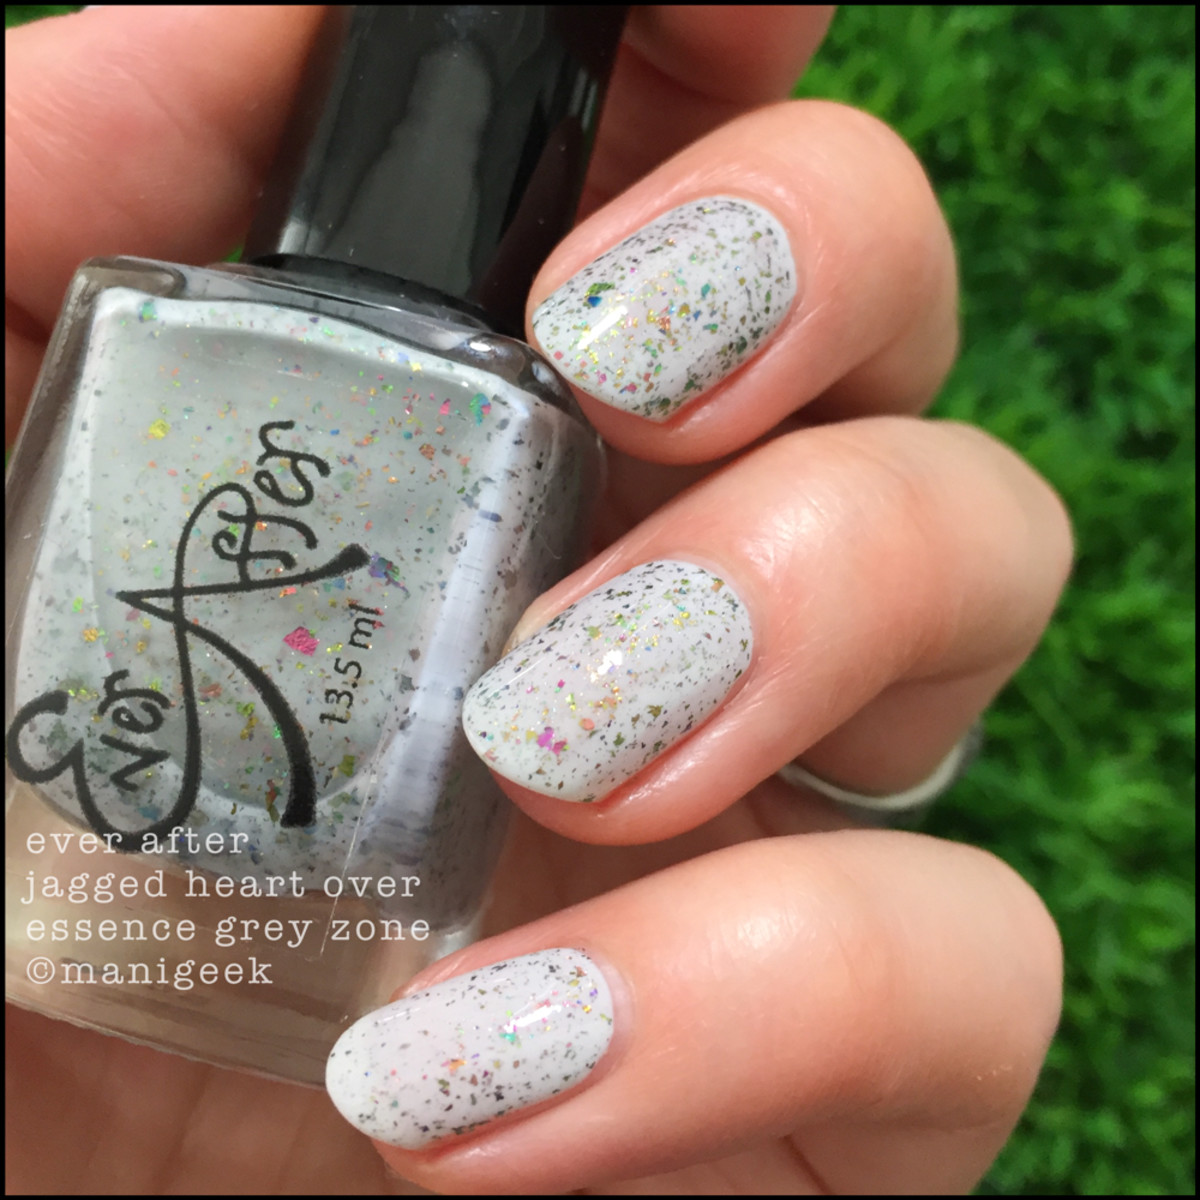 Ever After Jagged Heart over Essence Grey Zone w Salad _ 1000 Days of Untried Nail Polish Week 4